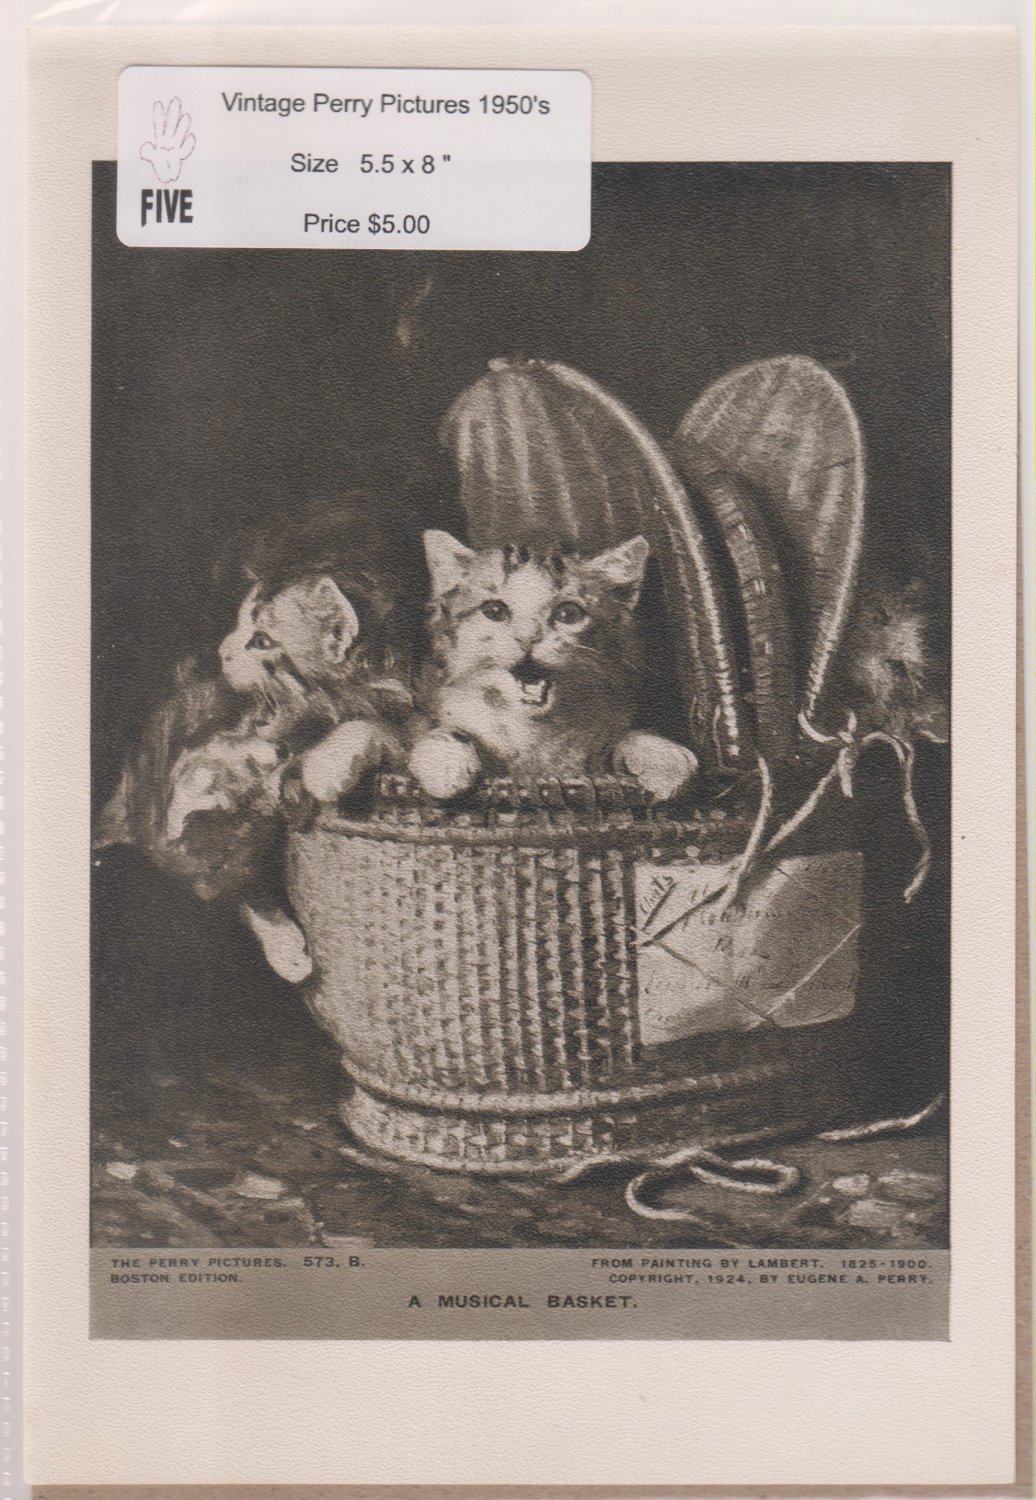 Vintage Perry Pictures - A Musical Basket